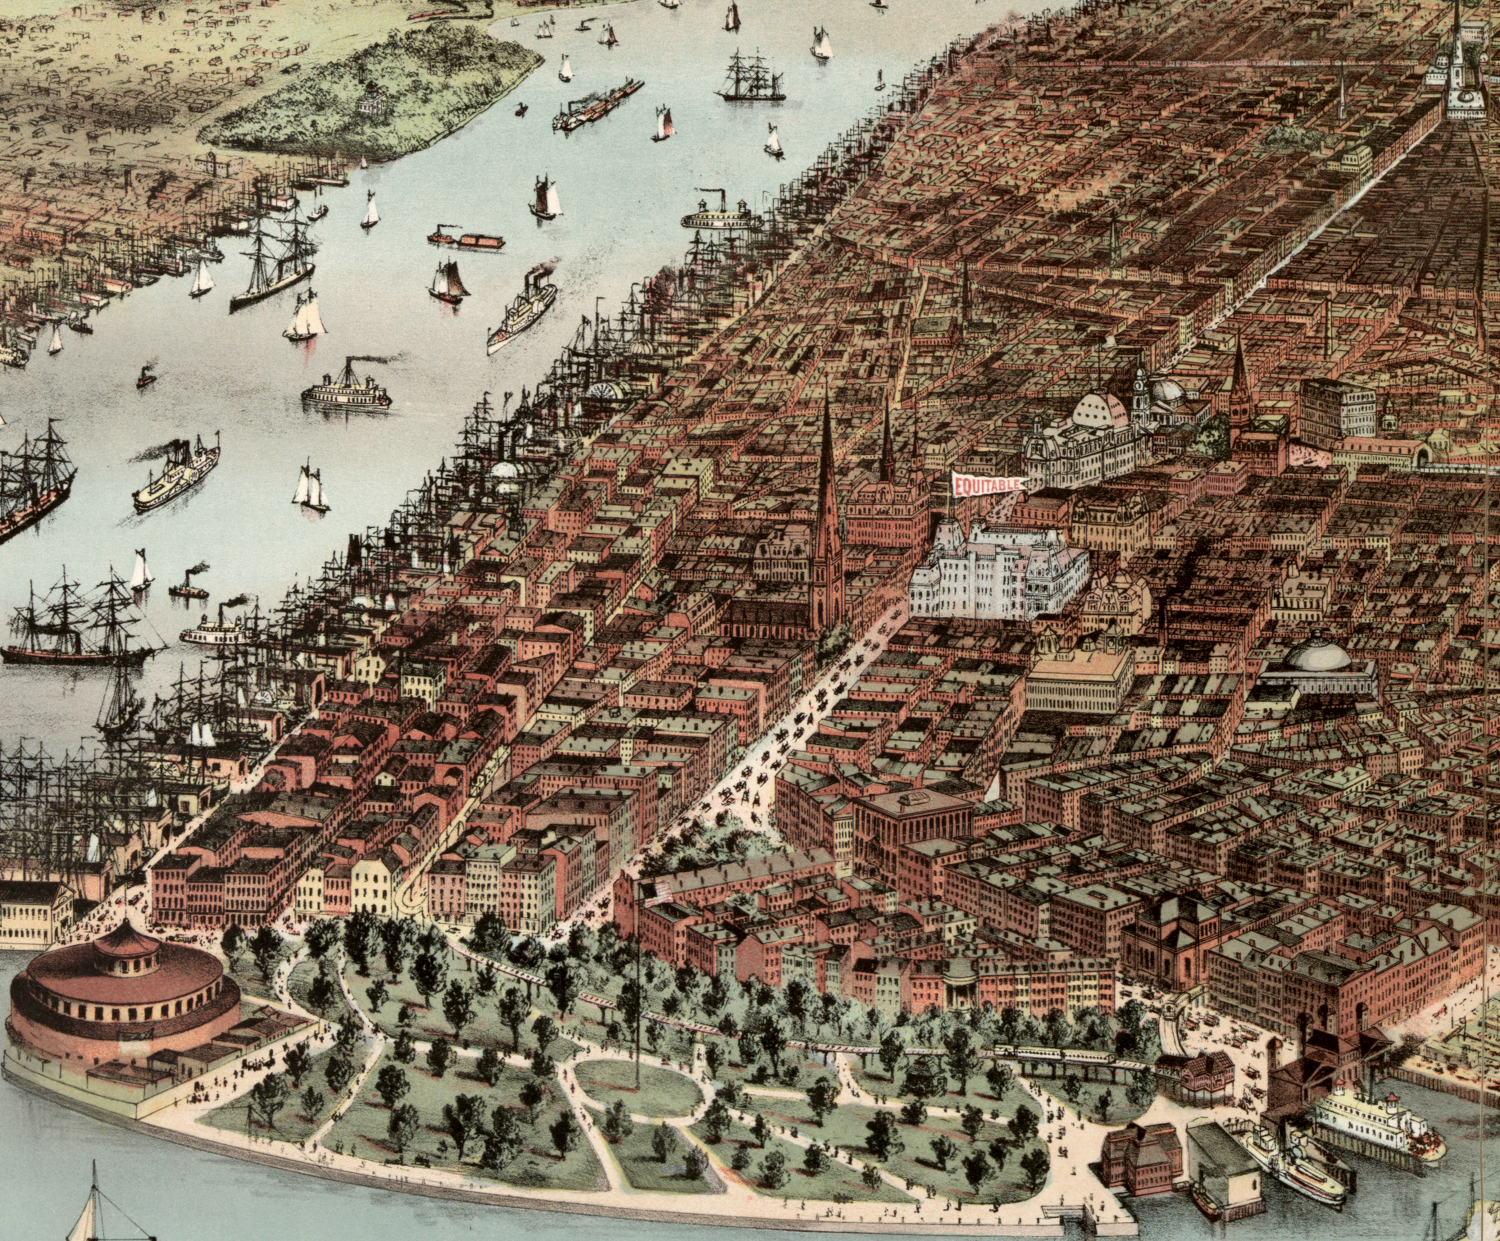 1883 battery detail of City of New York